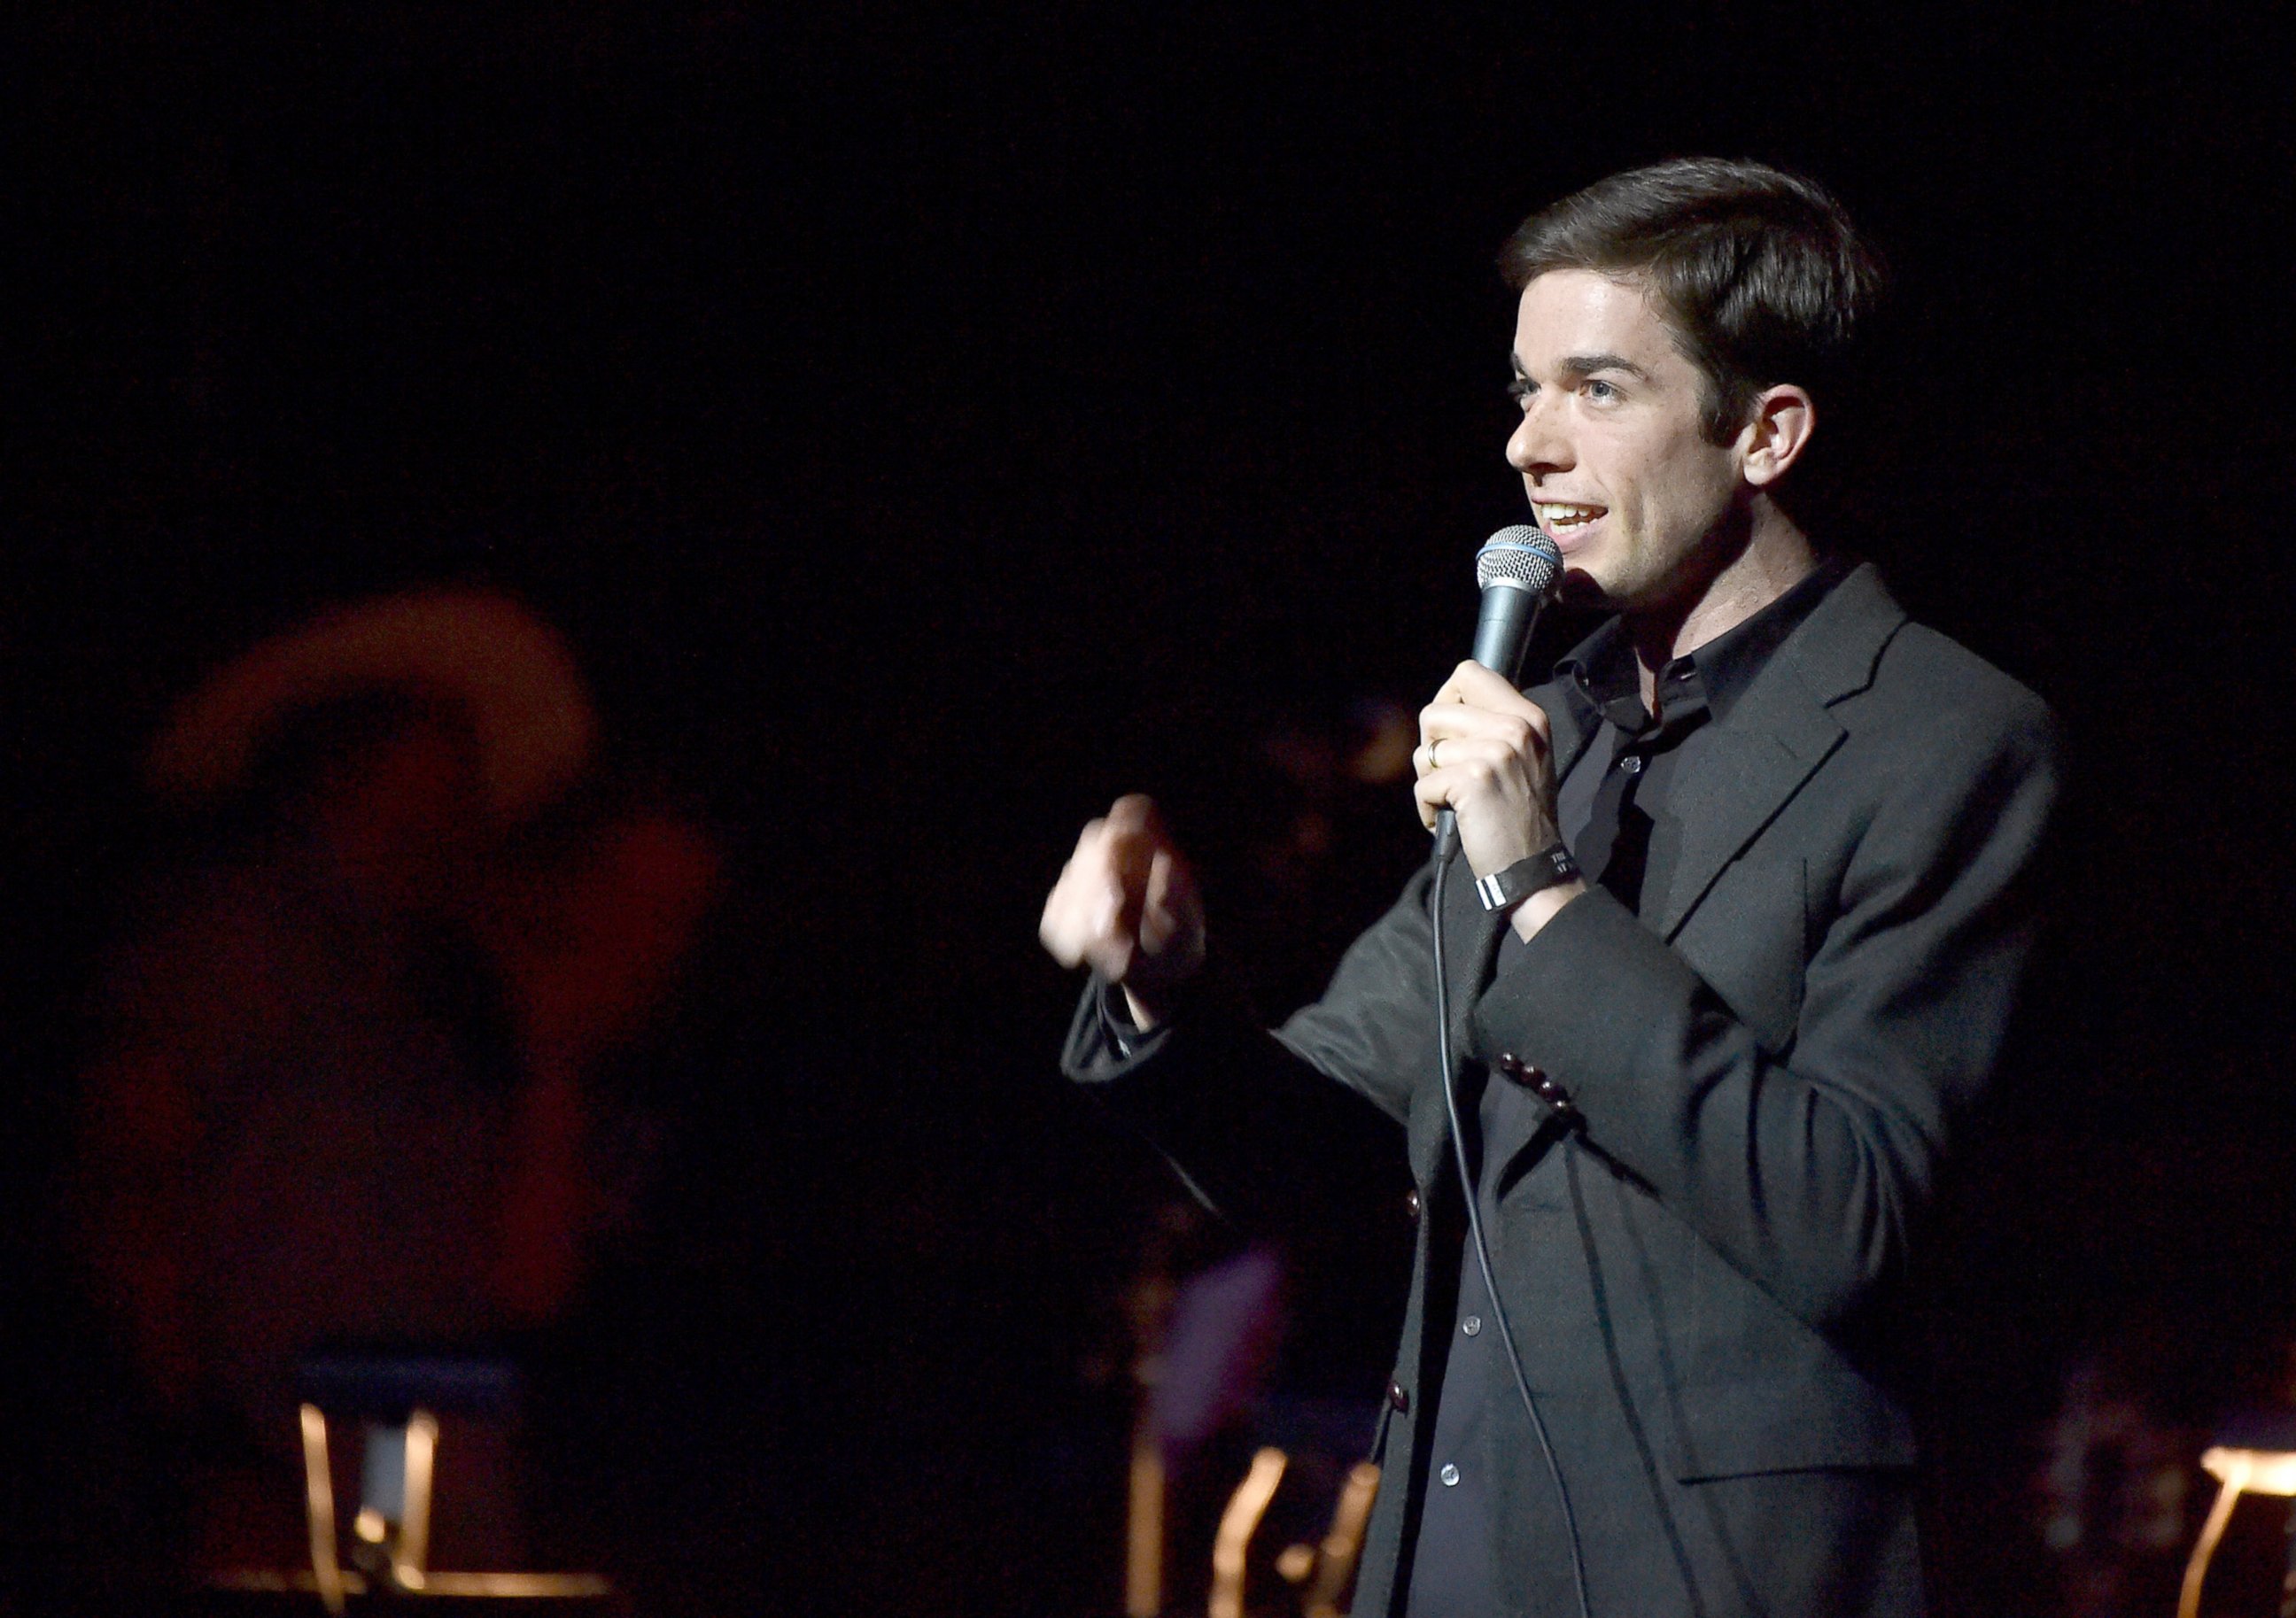 PHOTO: John Mulaney performs onstage during The David Lynch Foundation's DLF Live Celebration of the 60th Anniversary of Allen Ginsberg's "HOWL" with Music, Words, and Funny People at The Theatre at Ace Hotel, April 7, 2015, in Los Angeles.